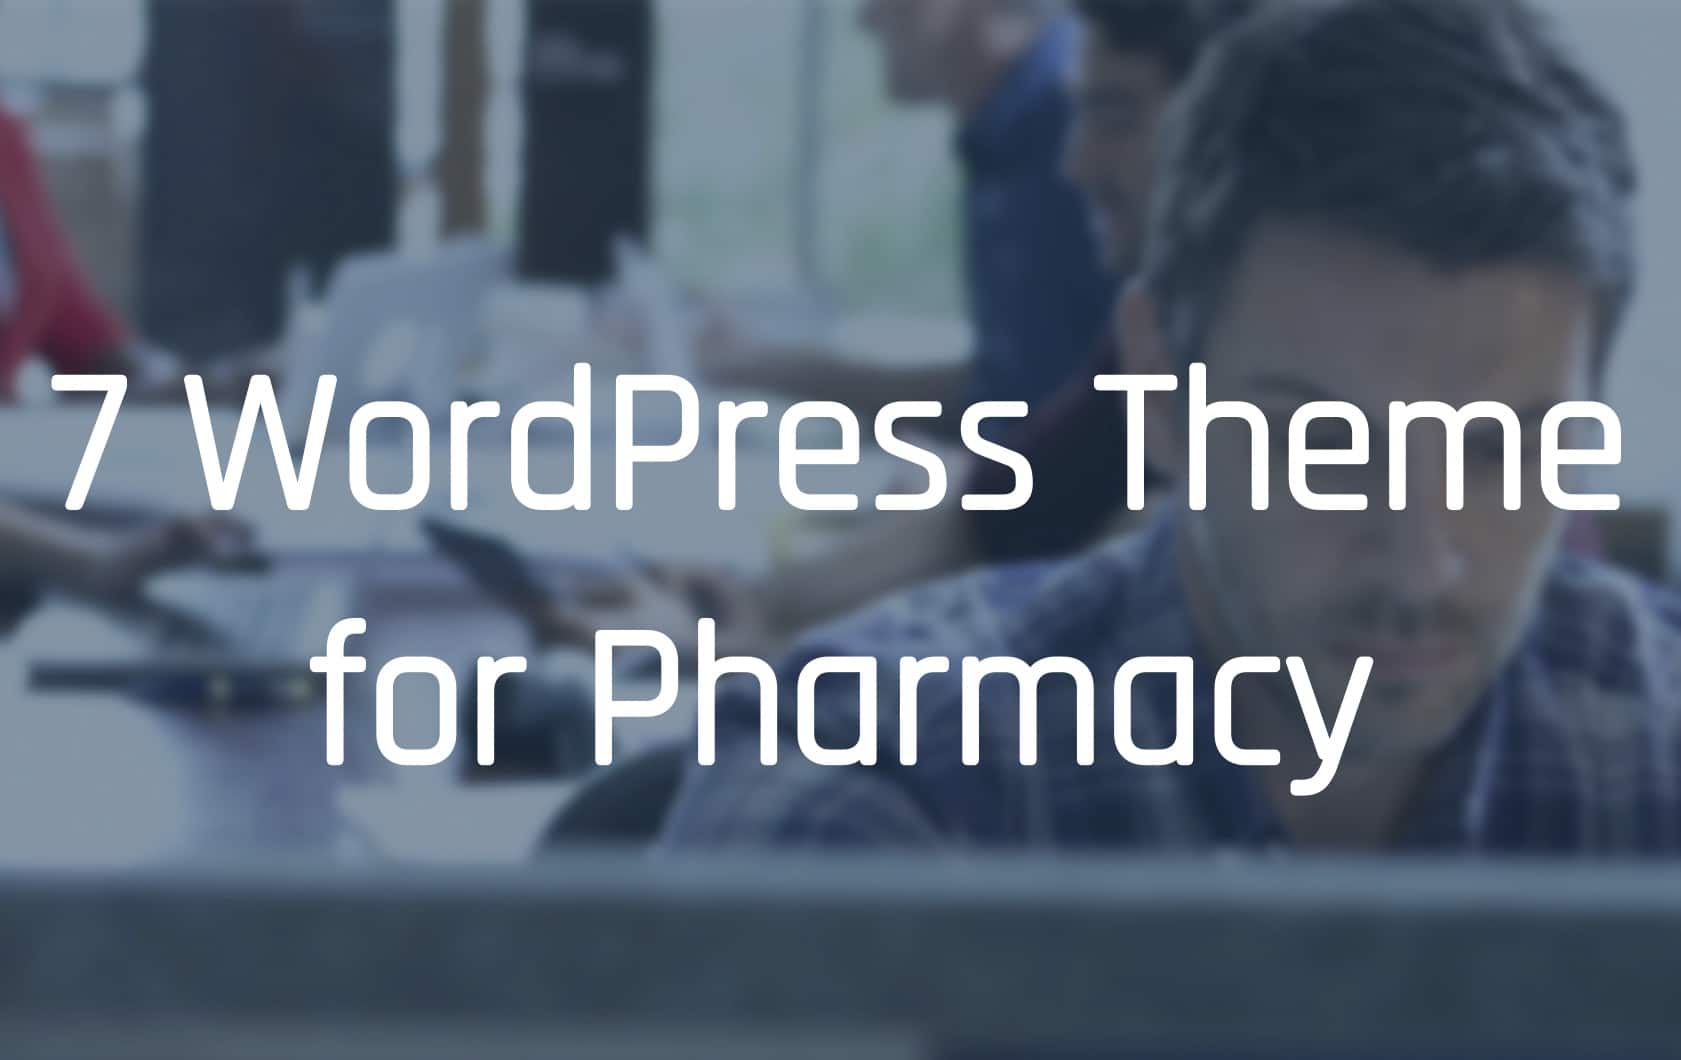 This image depicts a selection of seven WordPress themes designed specifically for pharmacies.